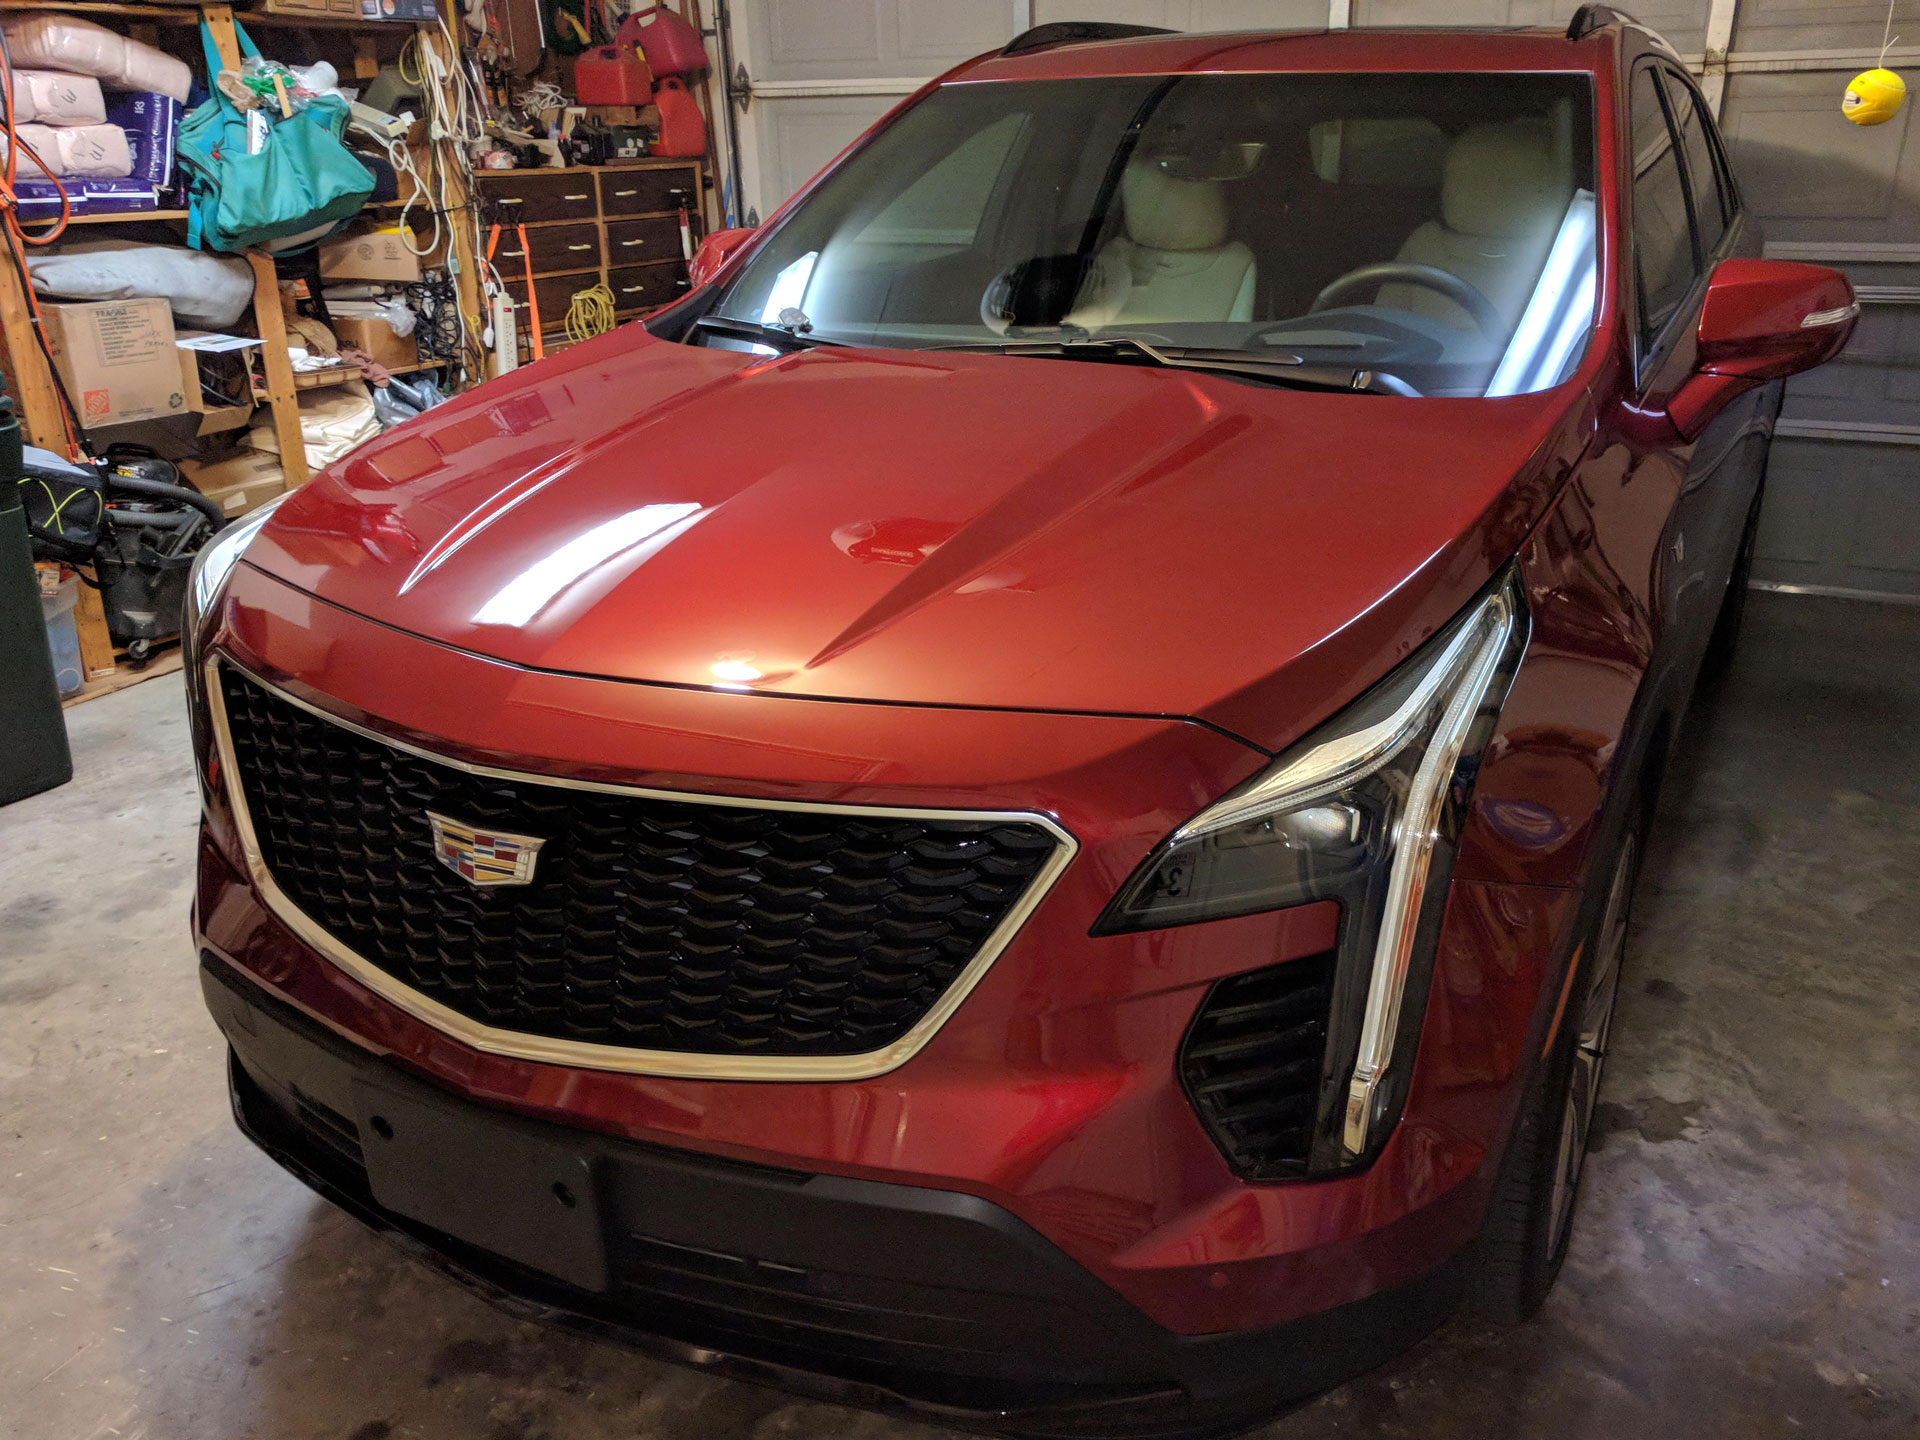 2020 Cadillac XT4 3M Pro Series Clear Bra Paint Protection